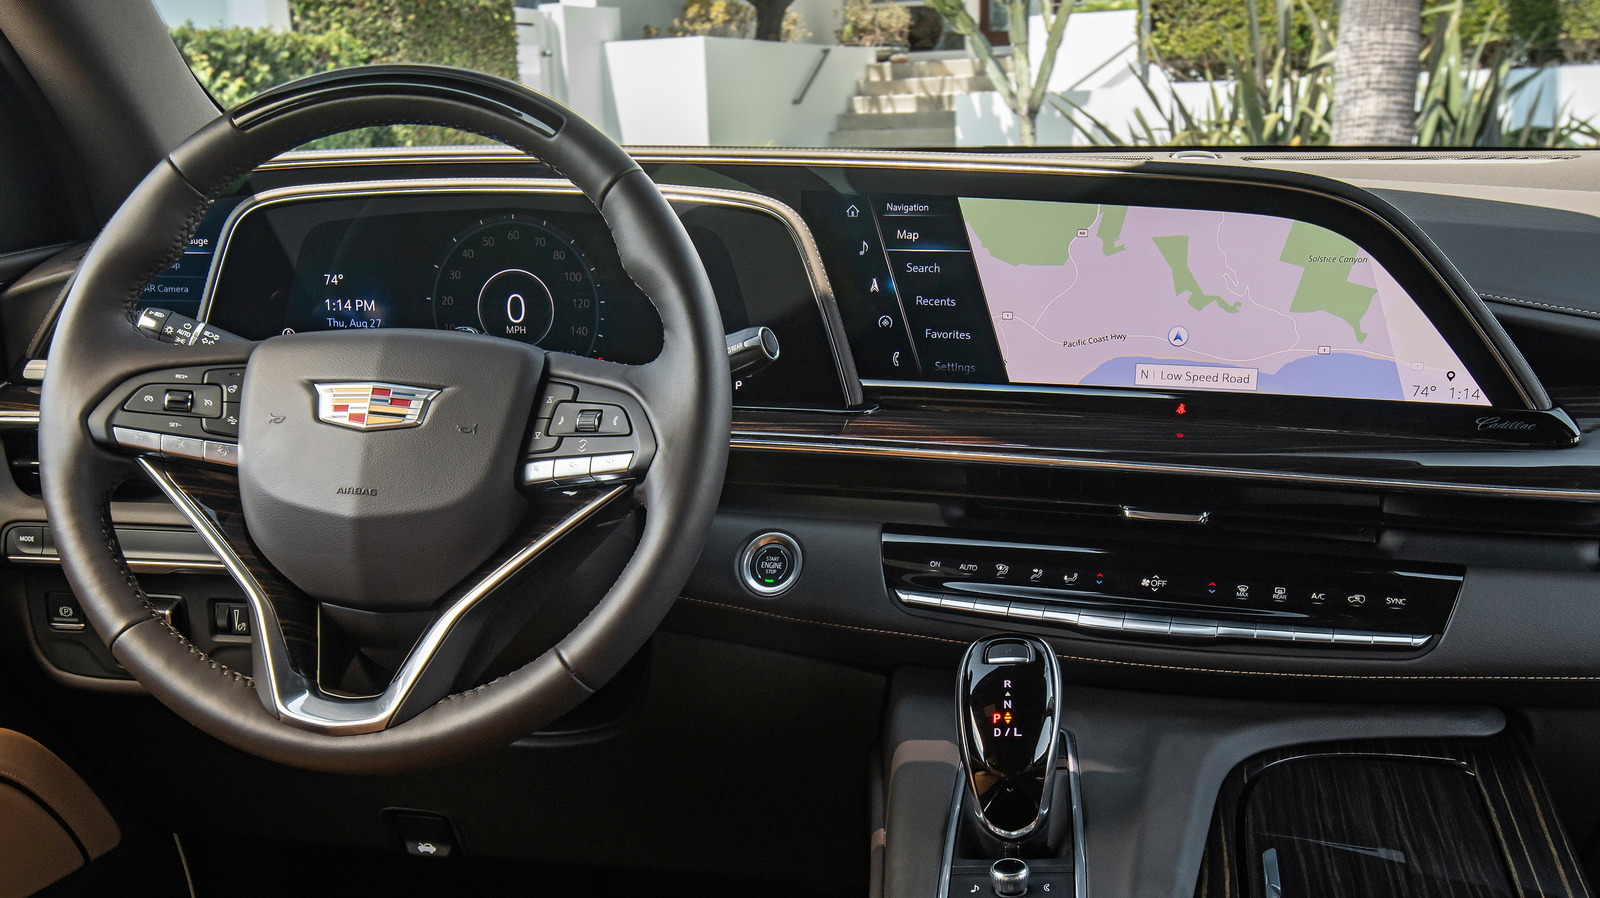 The 2023 Cadillac Escalade Interior Combines Gauges And Infotainment Into One Stunning OLED Dashboard – SlashGear